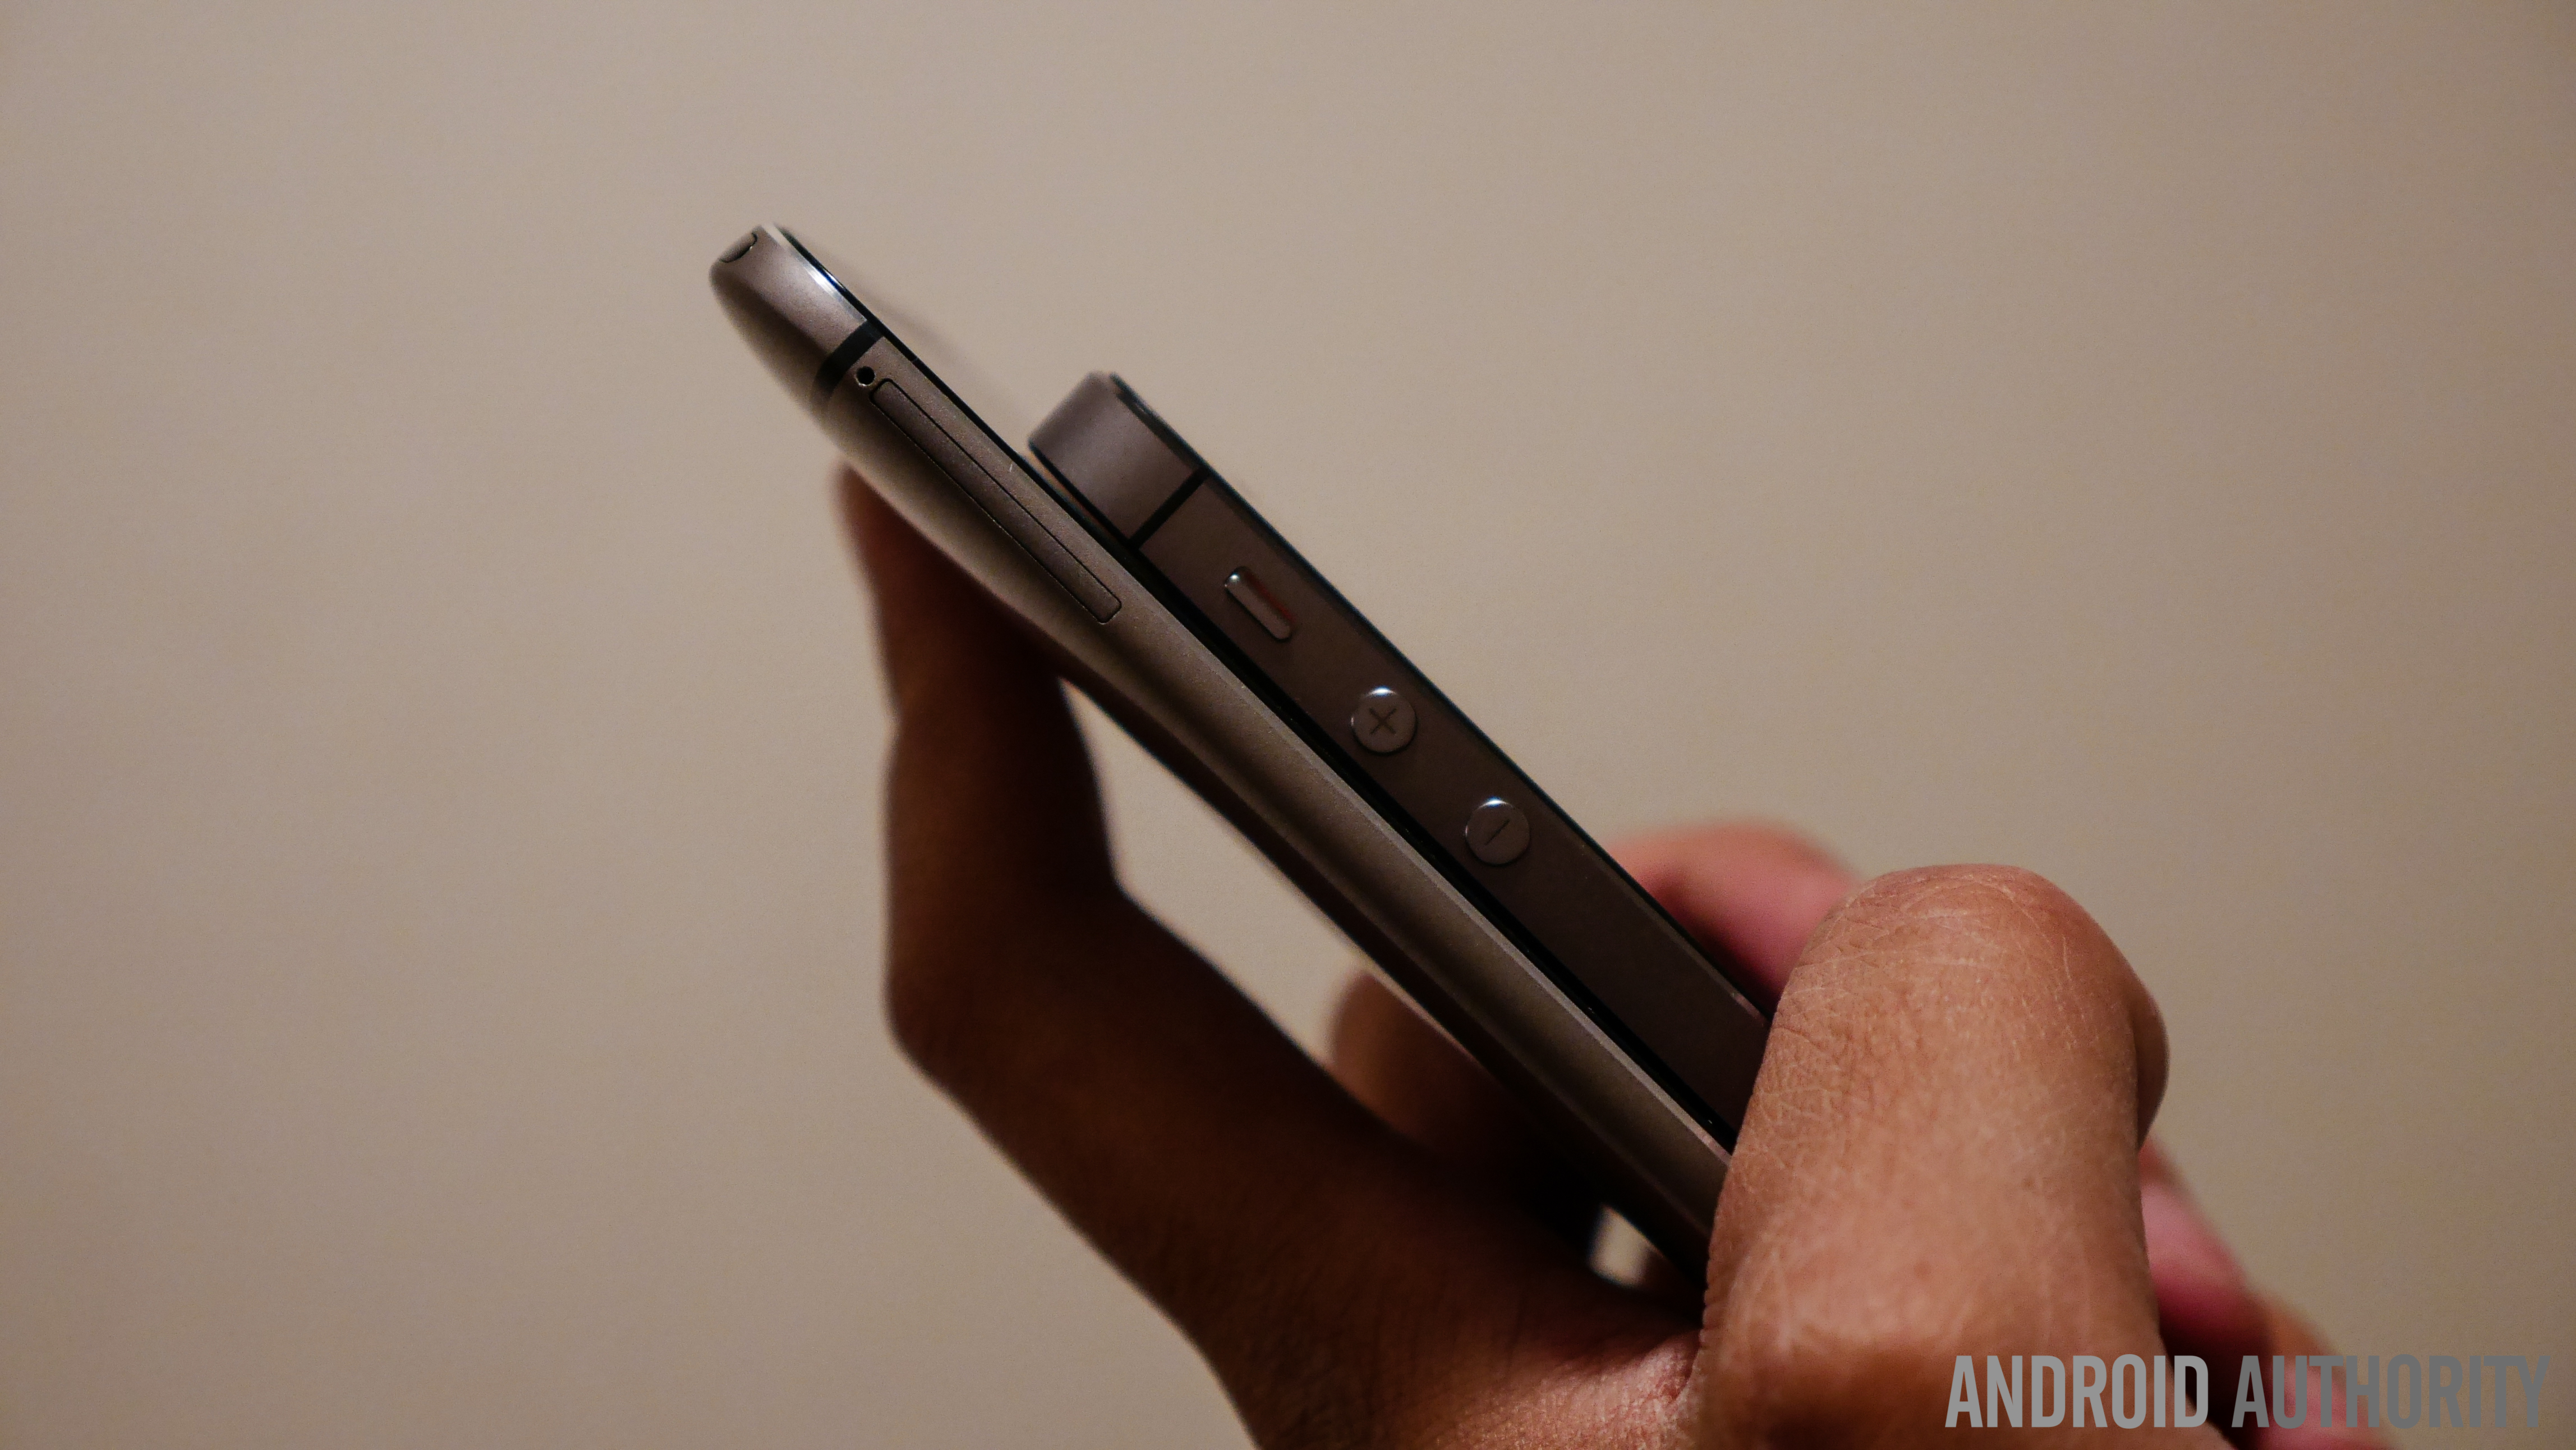 htc one m8 vs iphone 5s quick look aa (12 of 15)